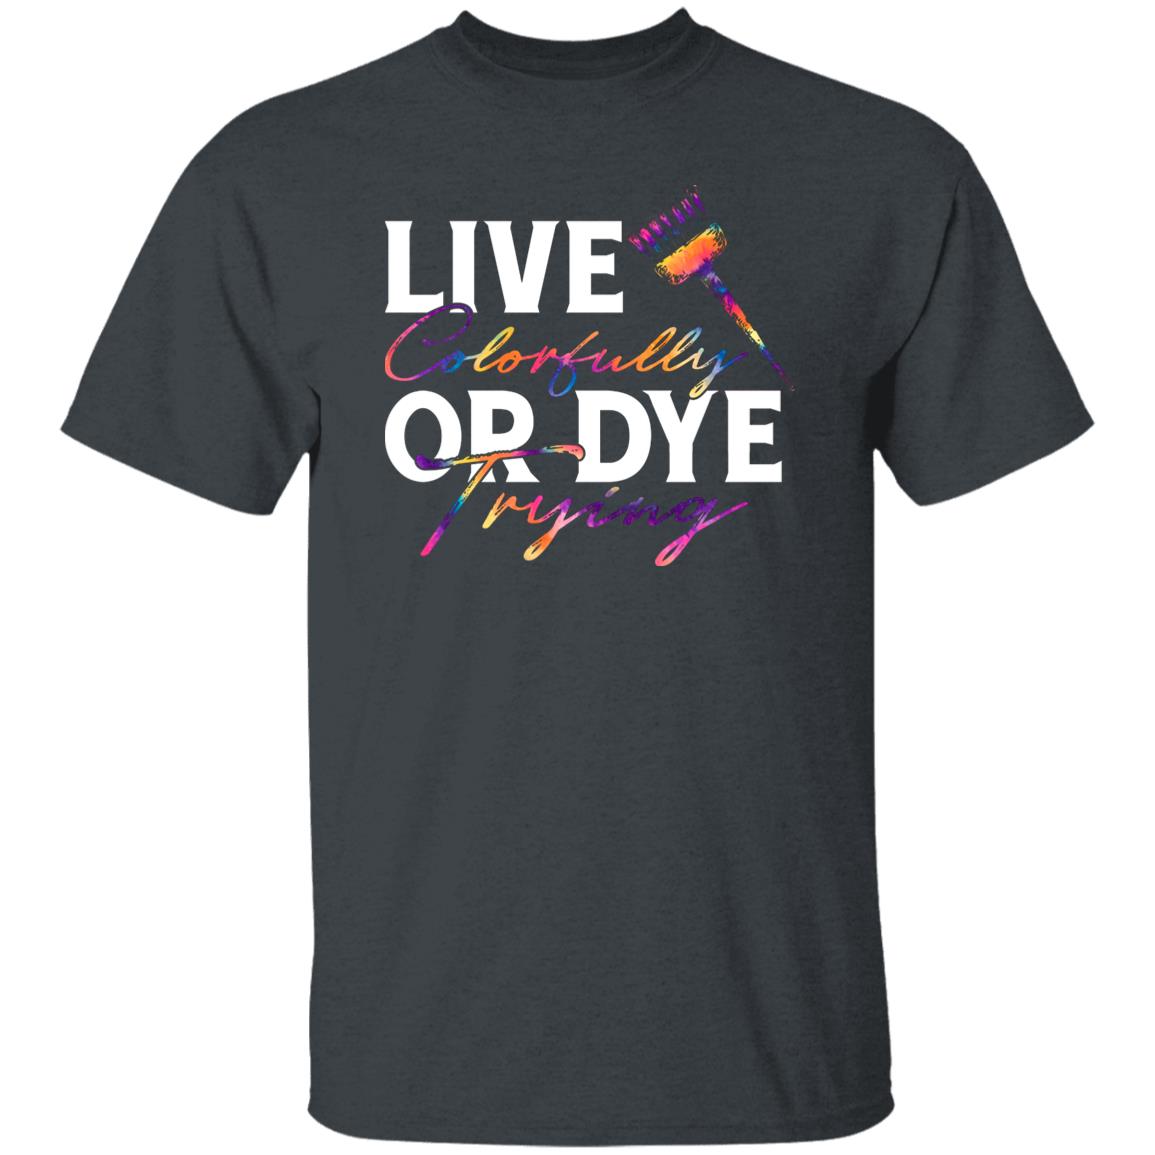 Live colorfully or dye trying Unisex T-shirt hairdresser haircutter tee black dark heather-Family-Gift-Planet